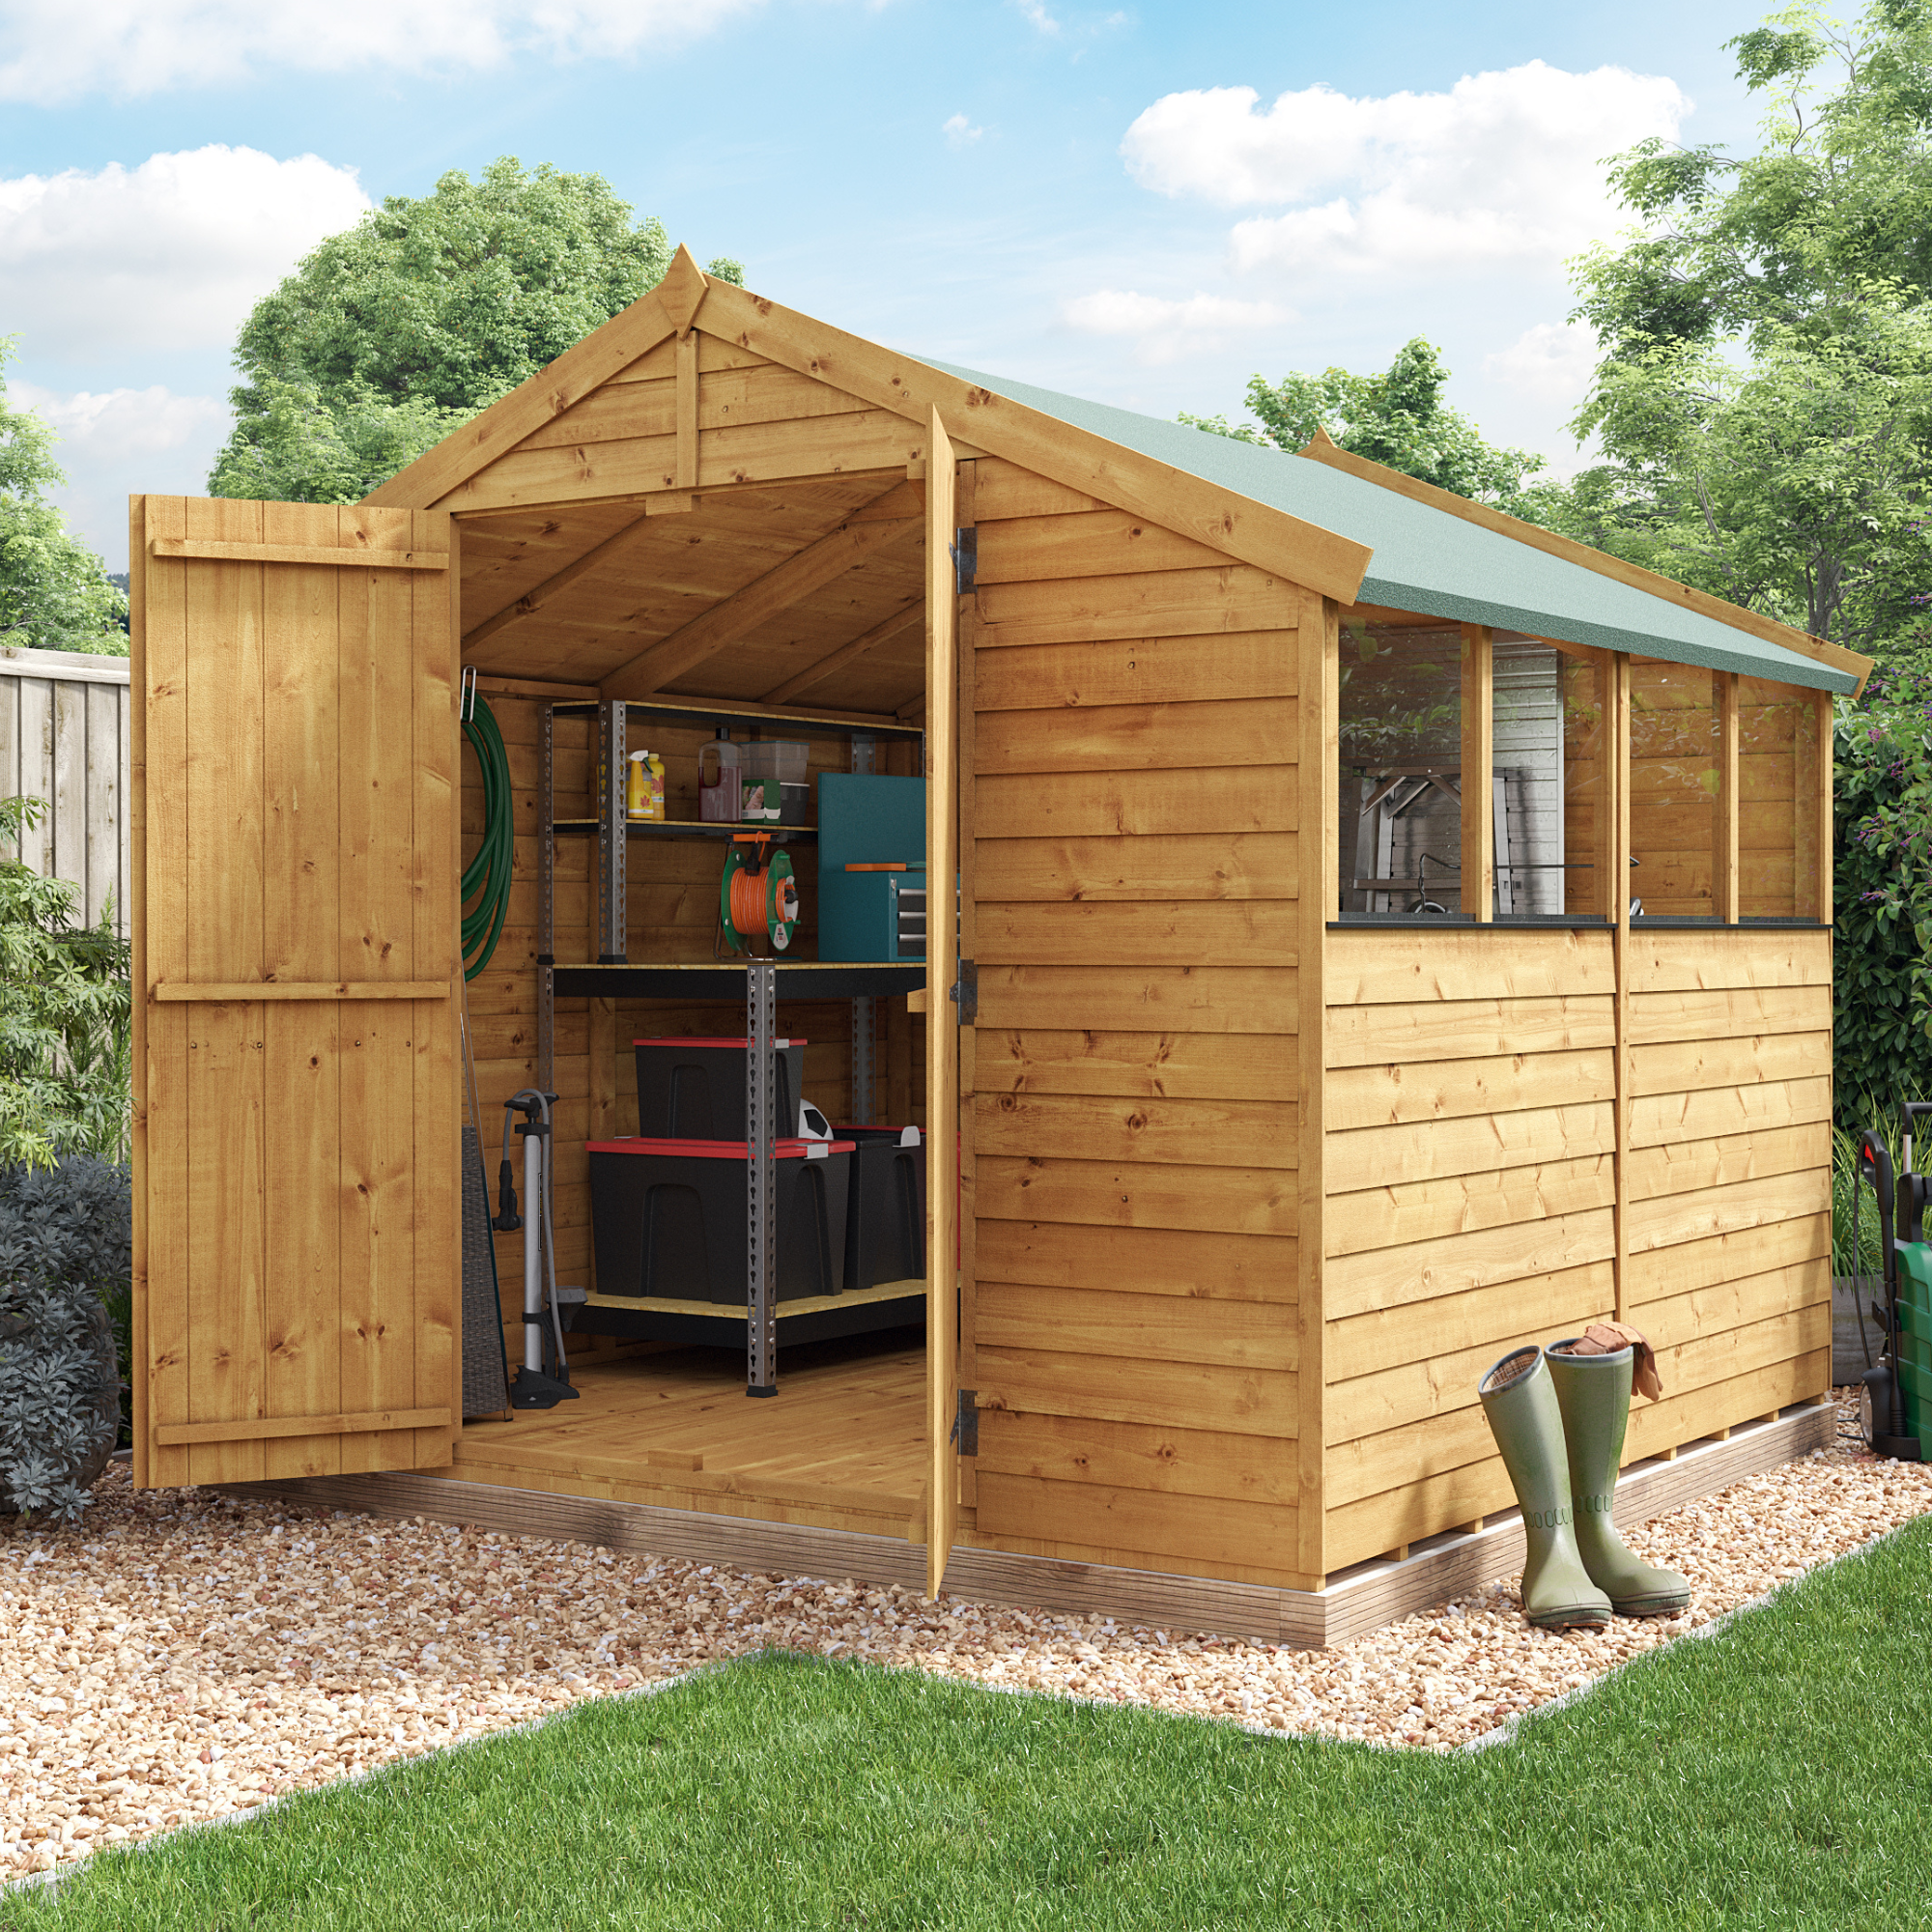 8 x 8 Shed - BillyOh Keeper Overlap Apex Wooden Shed - Windowed 8x8 Garden Shed